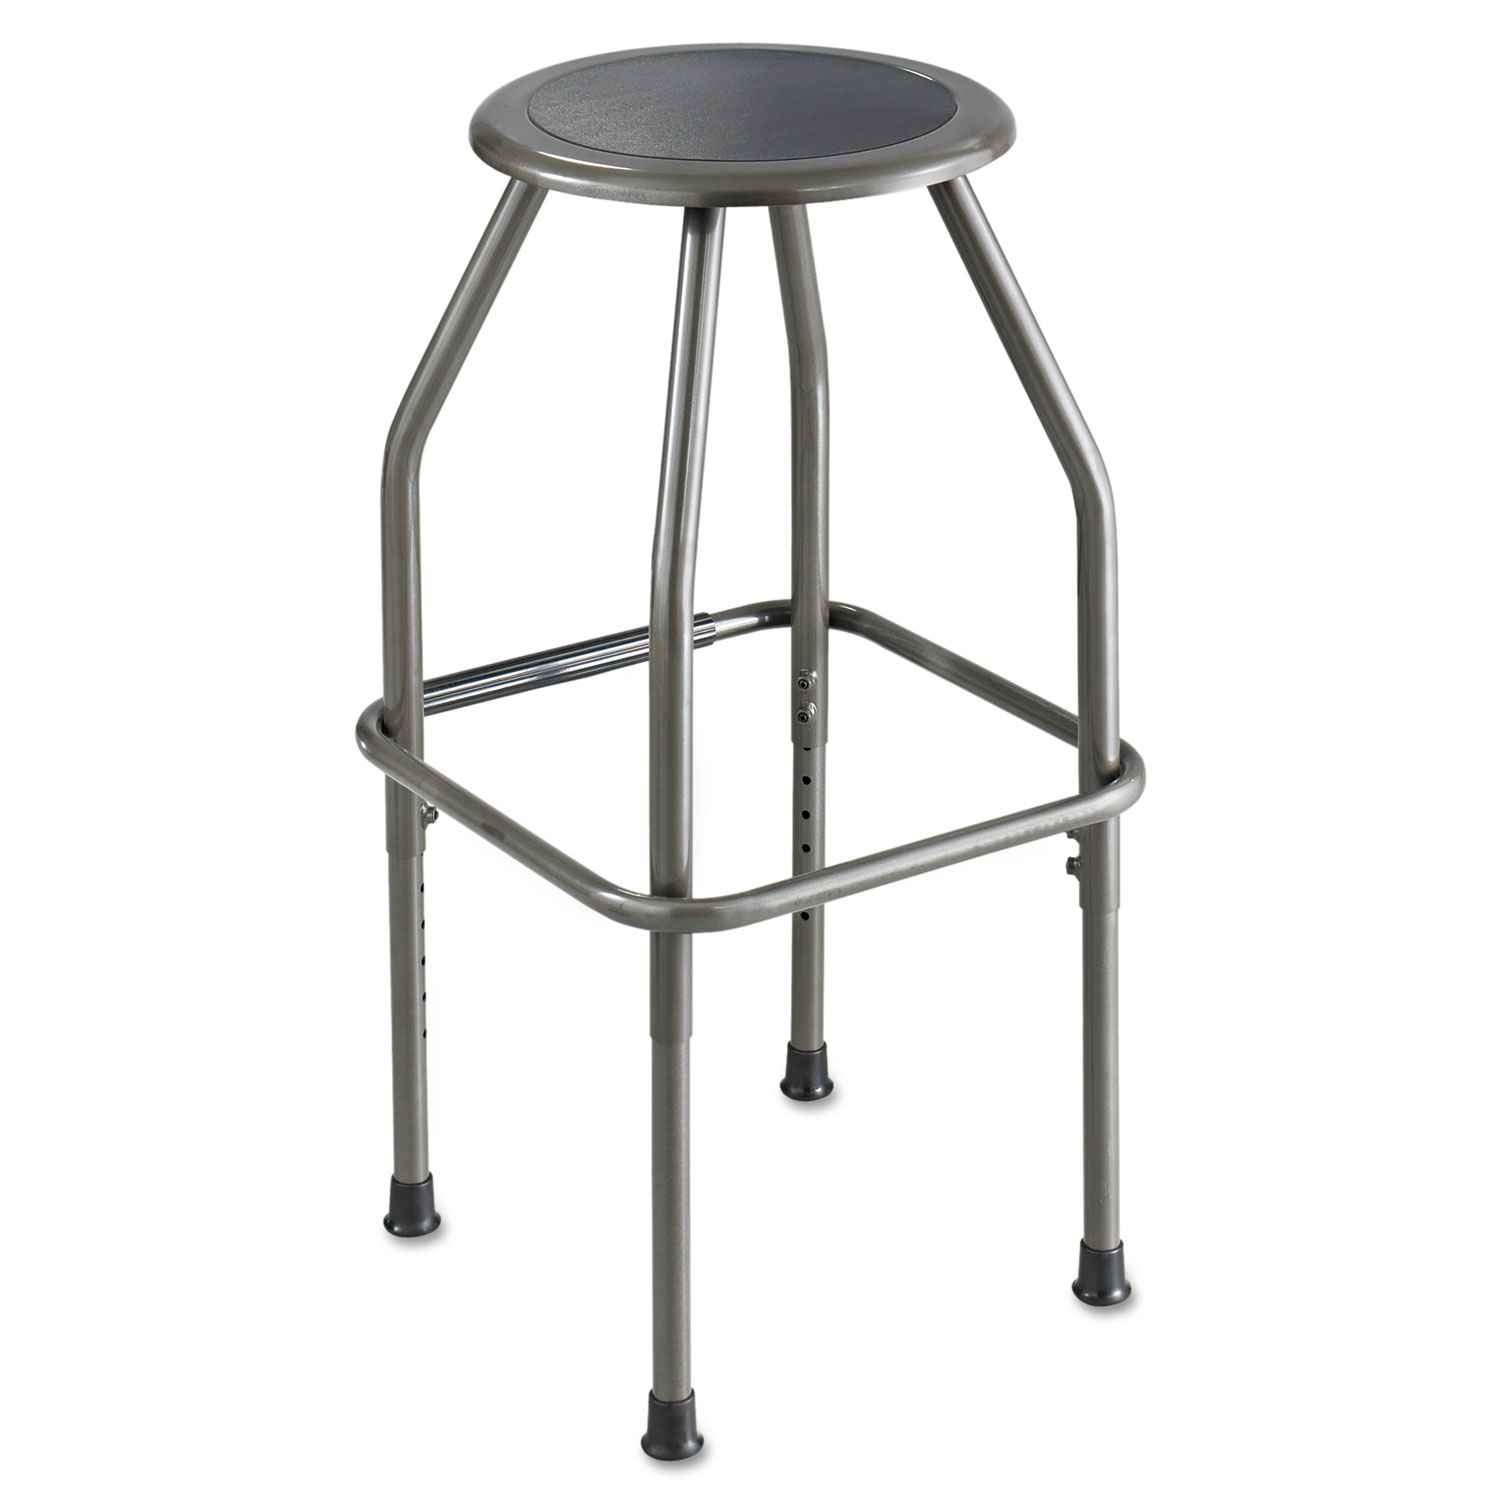  Safco 6666 Diesel Industrial Stool with Stationary Seat, 30 Seat Height, Supports up to 250 lbs., Pewter Seat/Pewter Back, Pewter Base (SAF6666) 